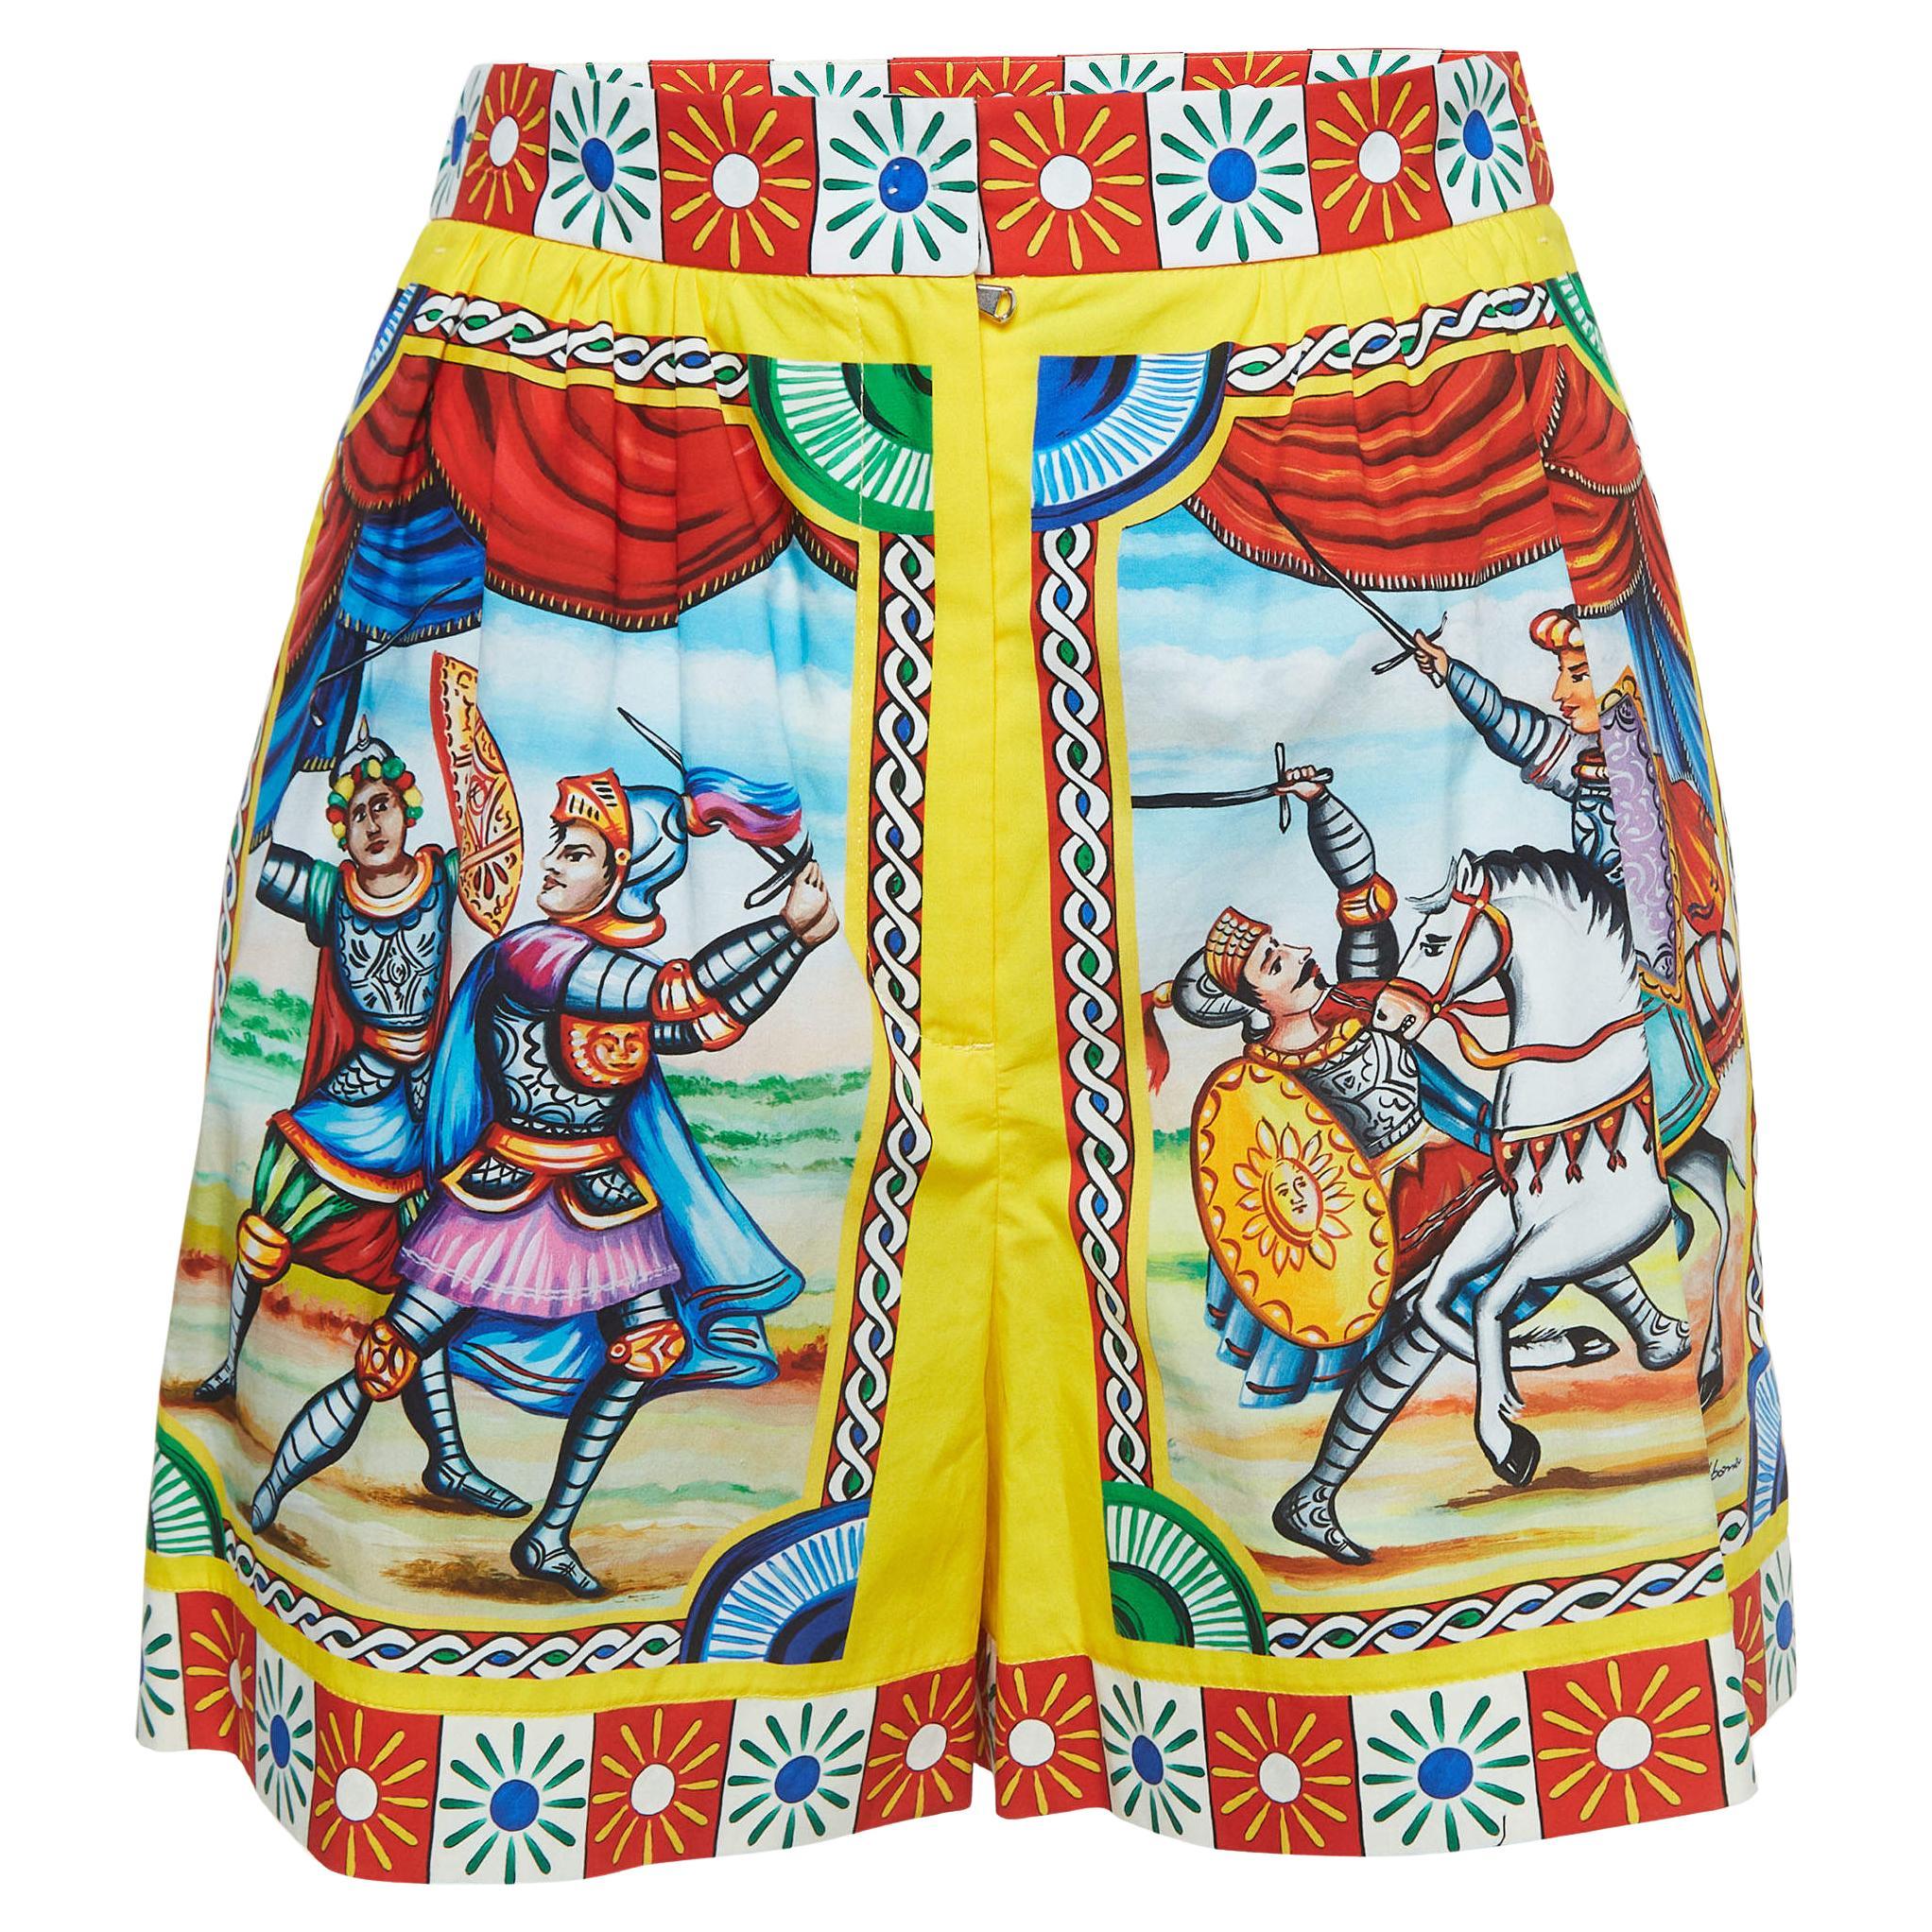 Dolce & Gabbana Multicolor Printed Cotton High Waist Shorts S For Sale